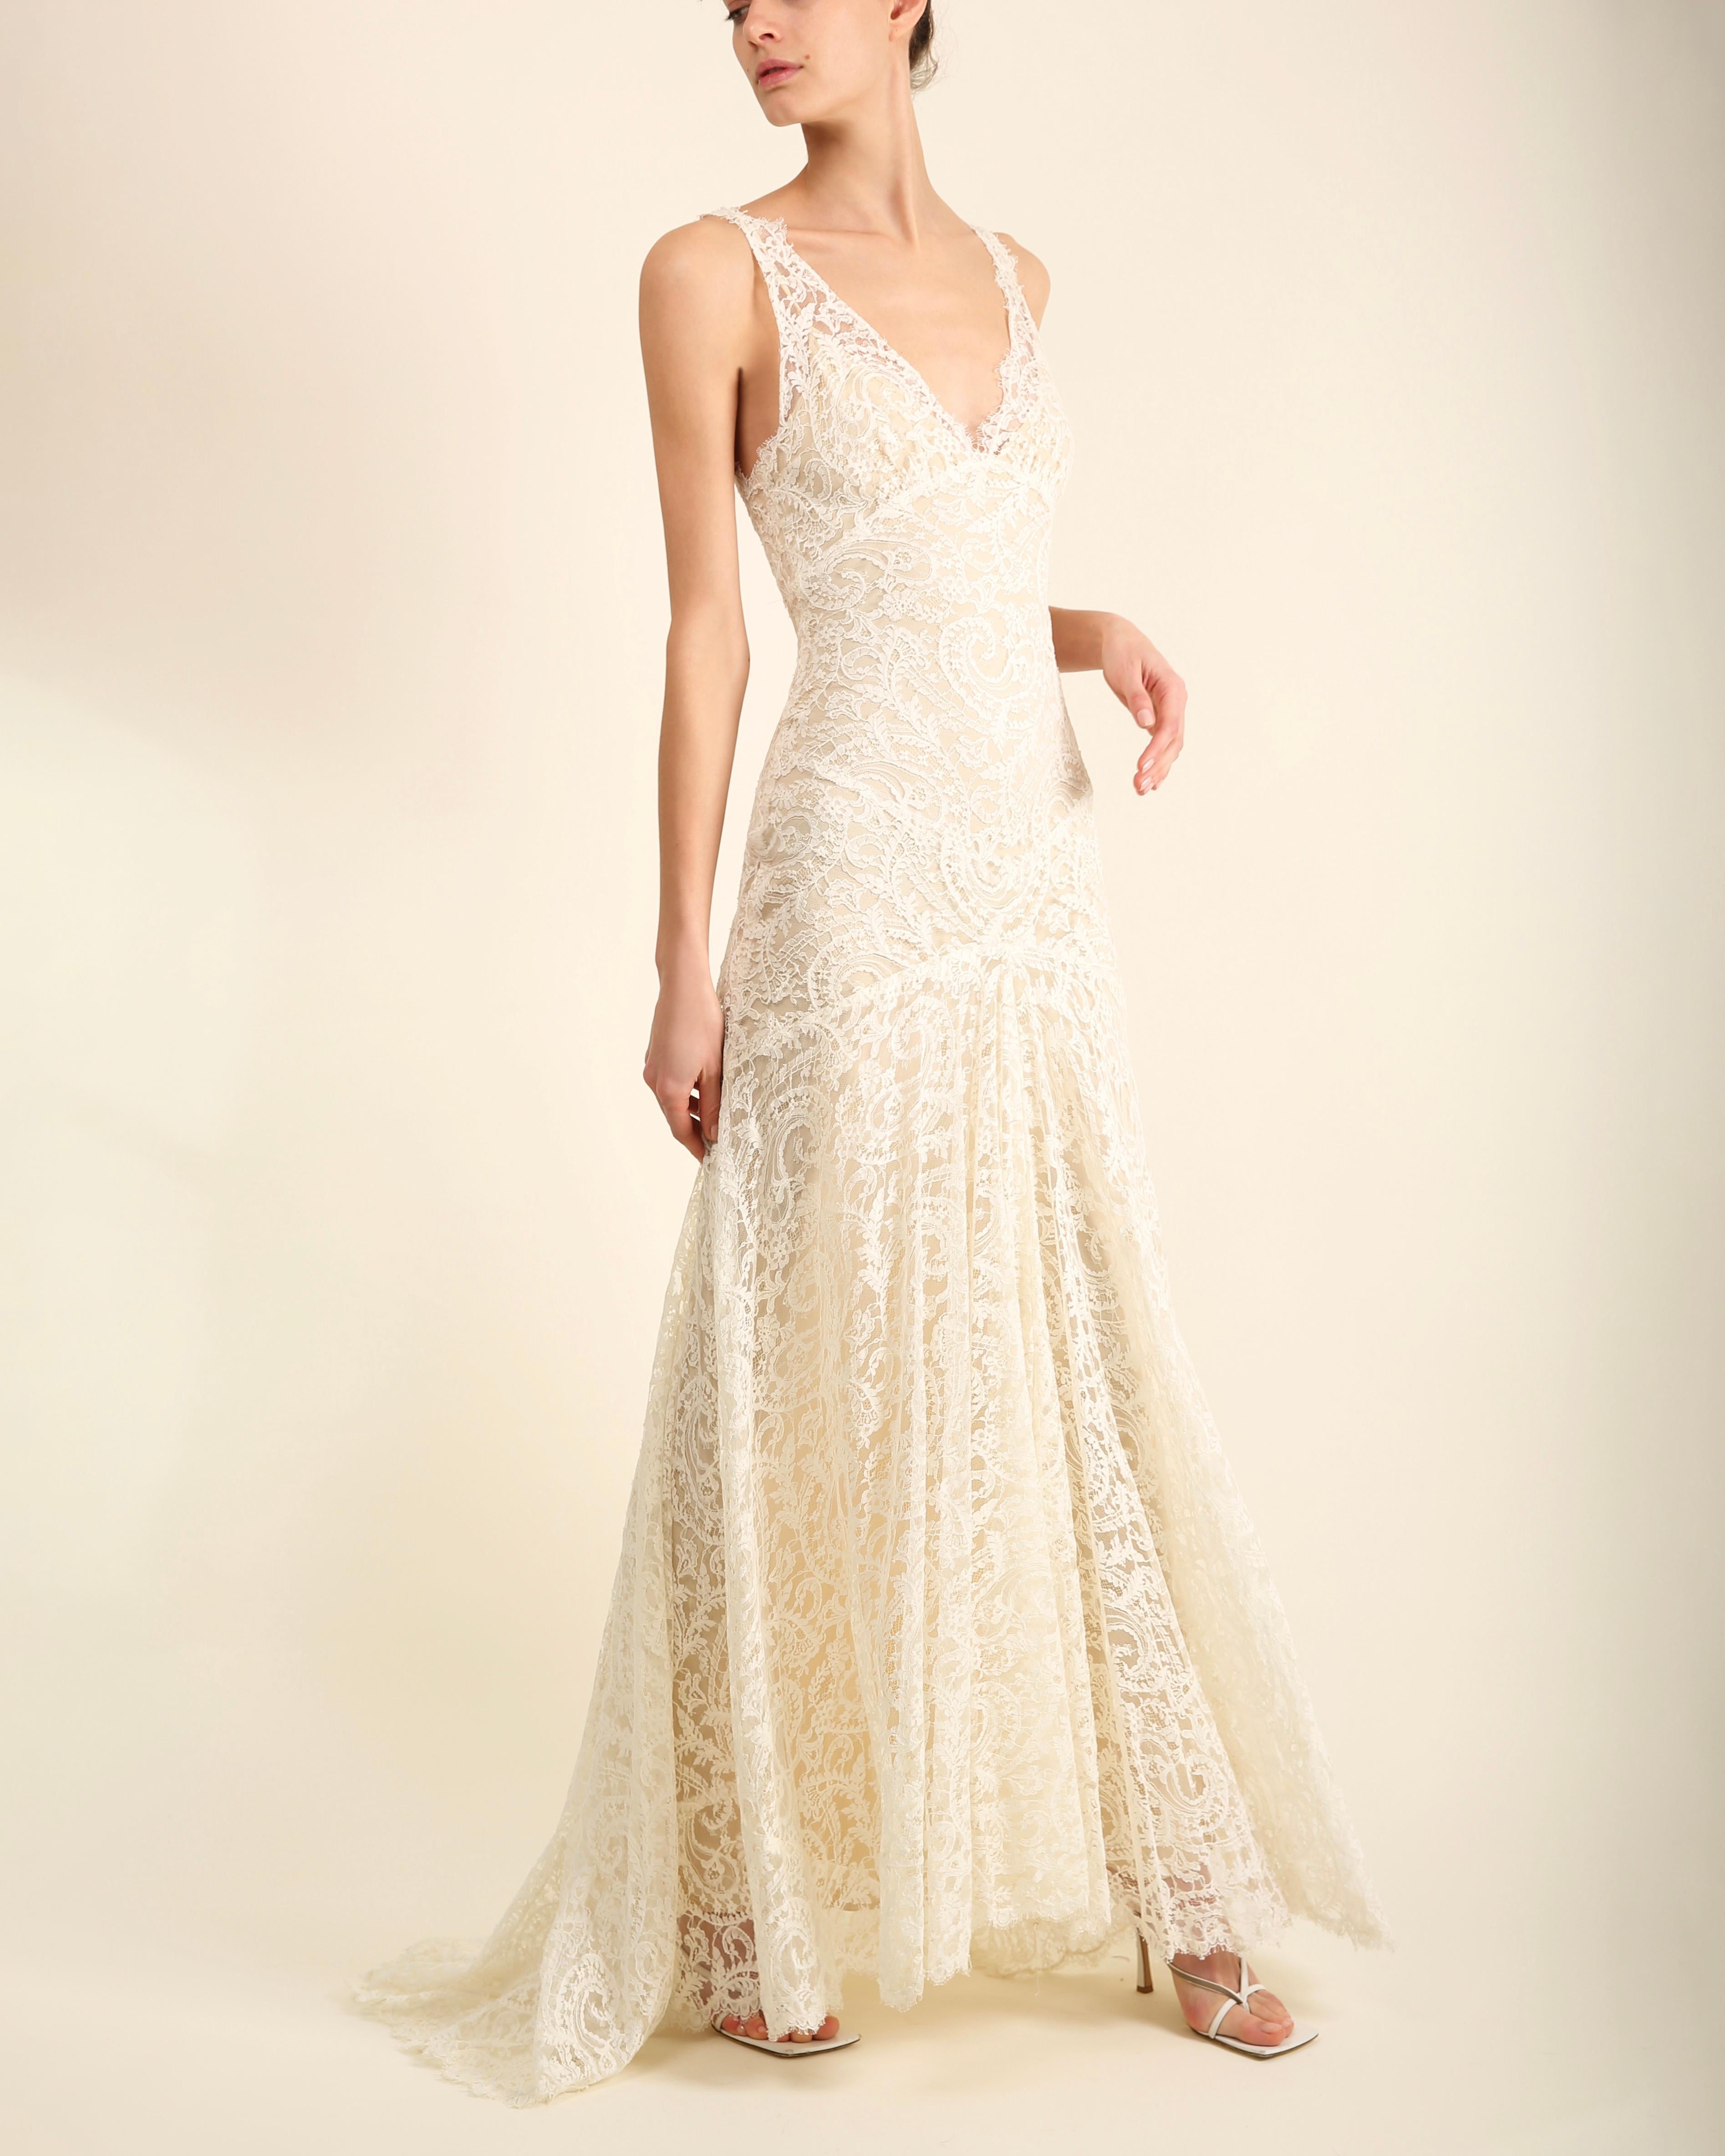 Women's or Men's Monique Lhuillier ivory lace plunging backless wedding gown with train dress 